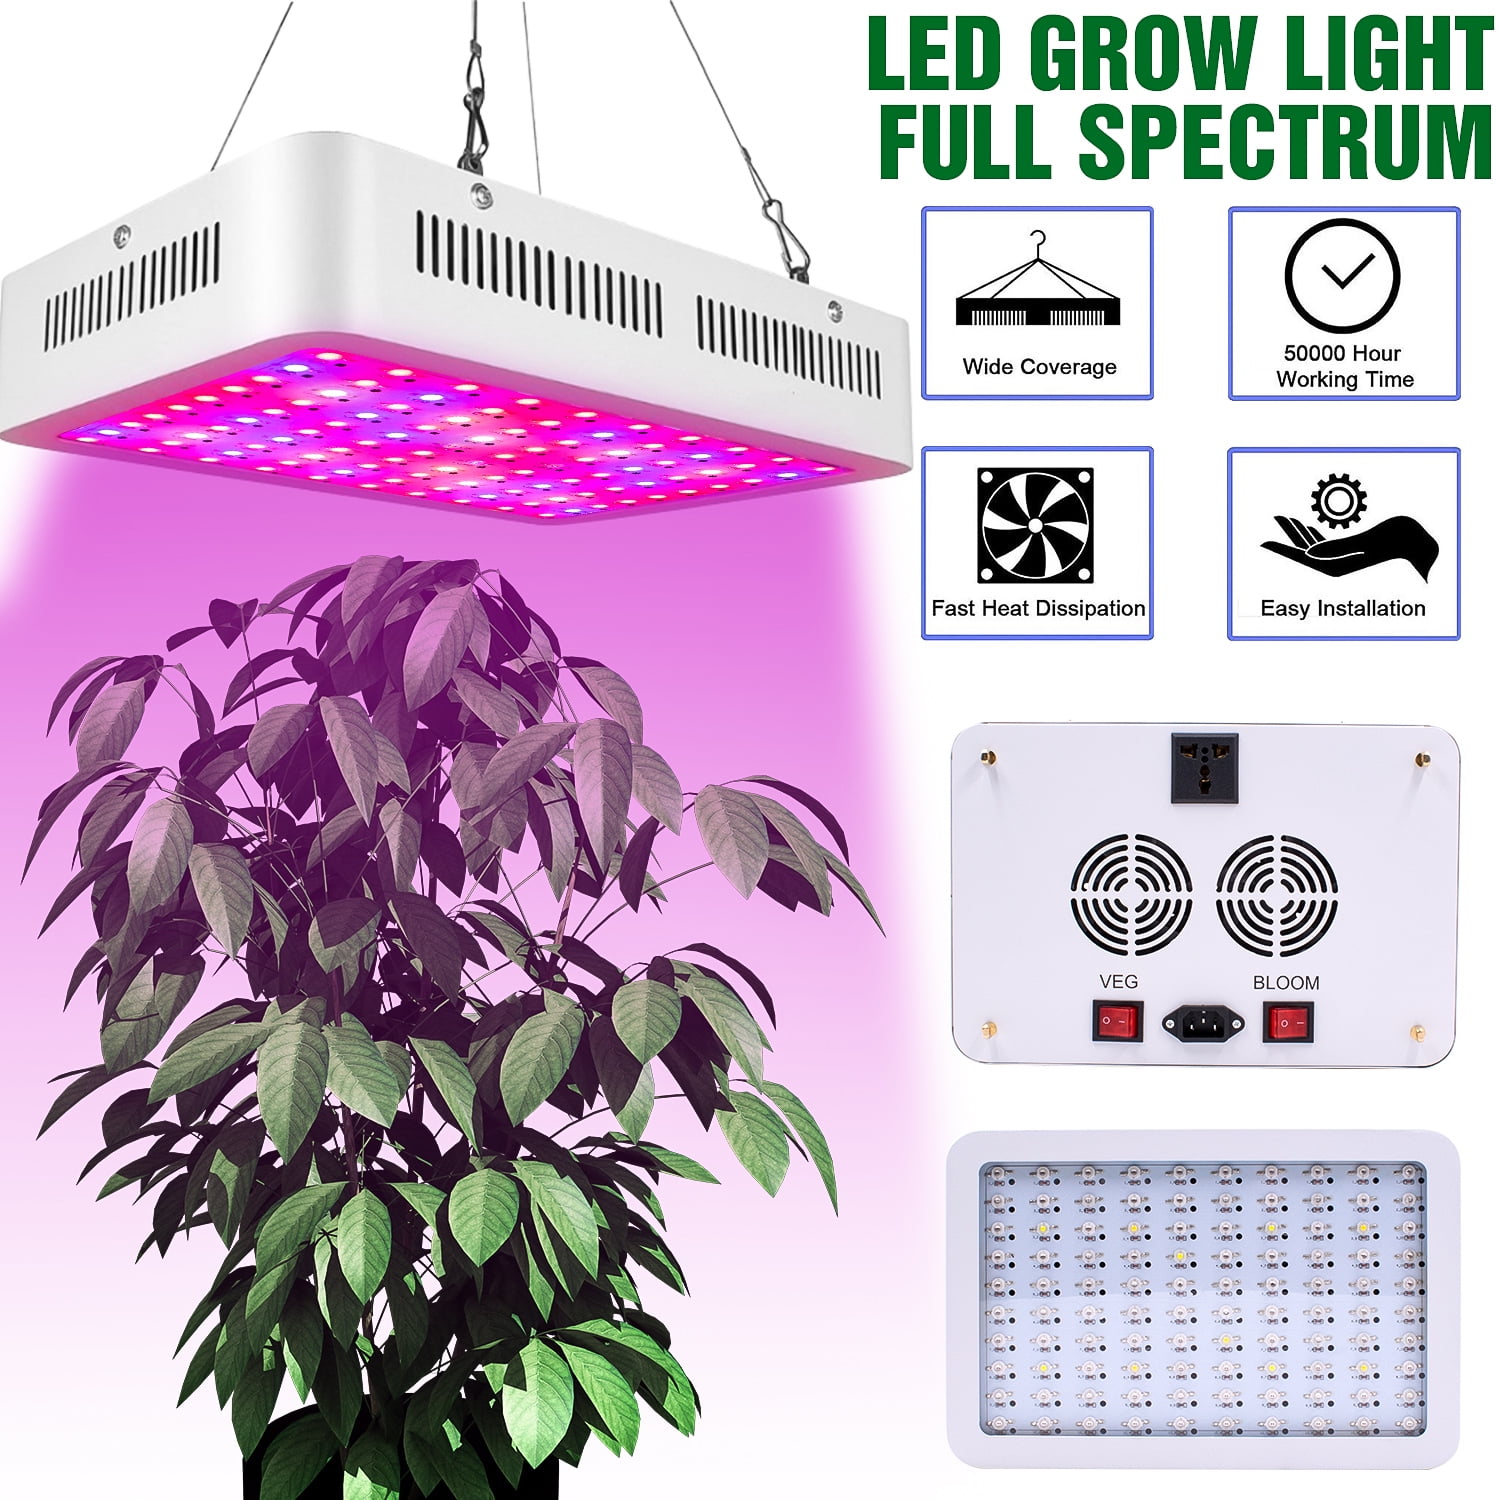 Daisy Chain KOSCHEAL 2000w LED Grow Light Full Spectrum Dimmable LED Grow Light Plant Growing Light with LM301H LEDs & MeanWell Driver 3*4ft Cover for Indoor Plants Seedling Veg Flower